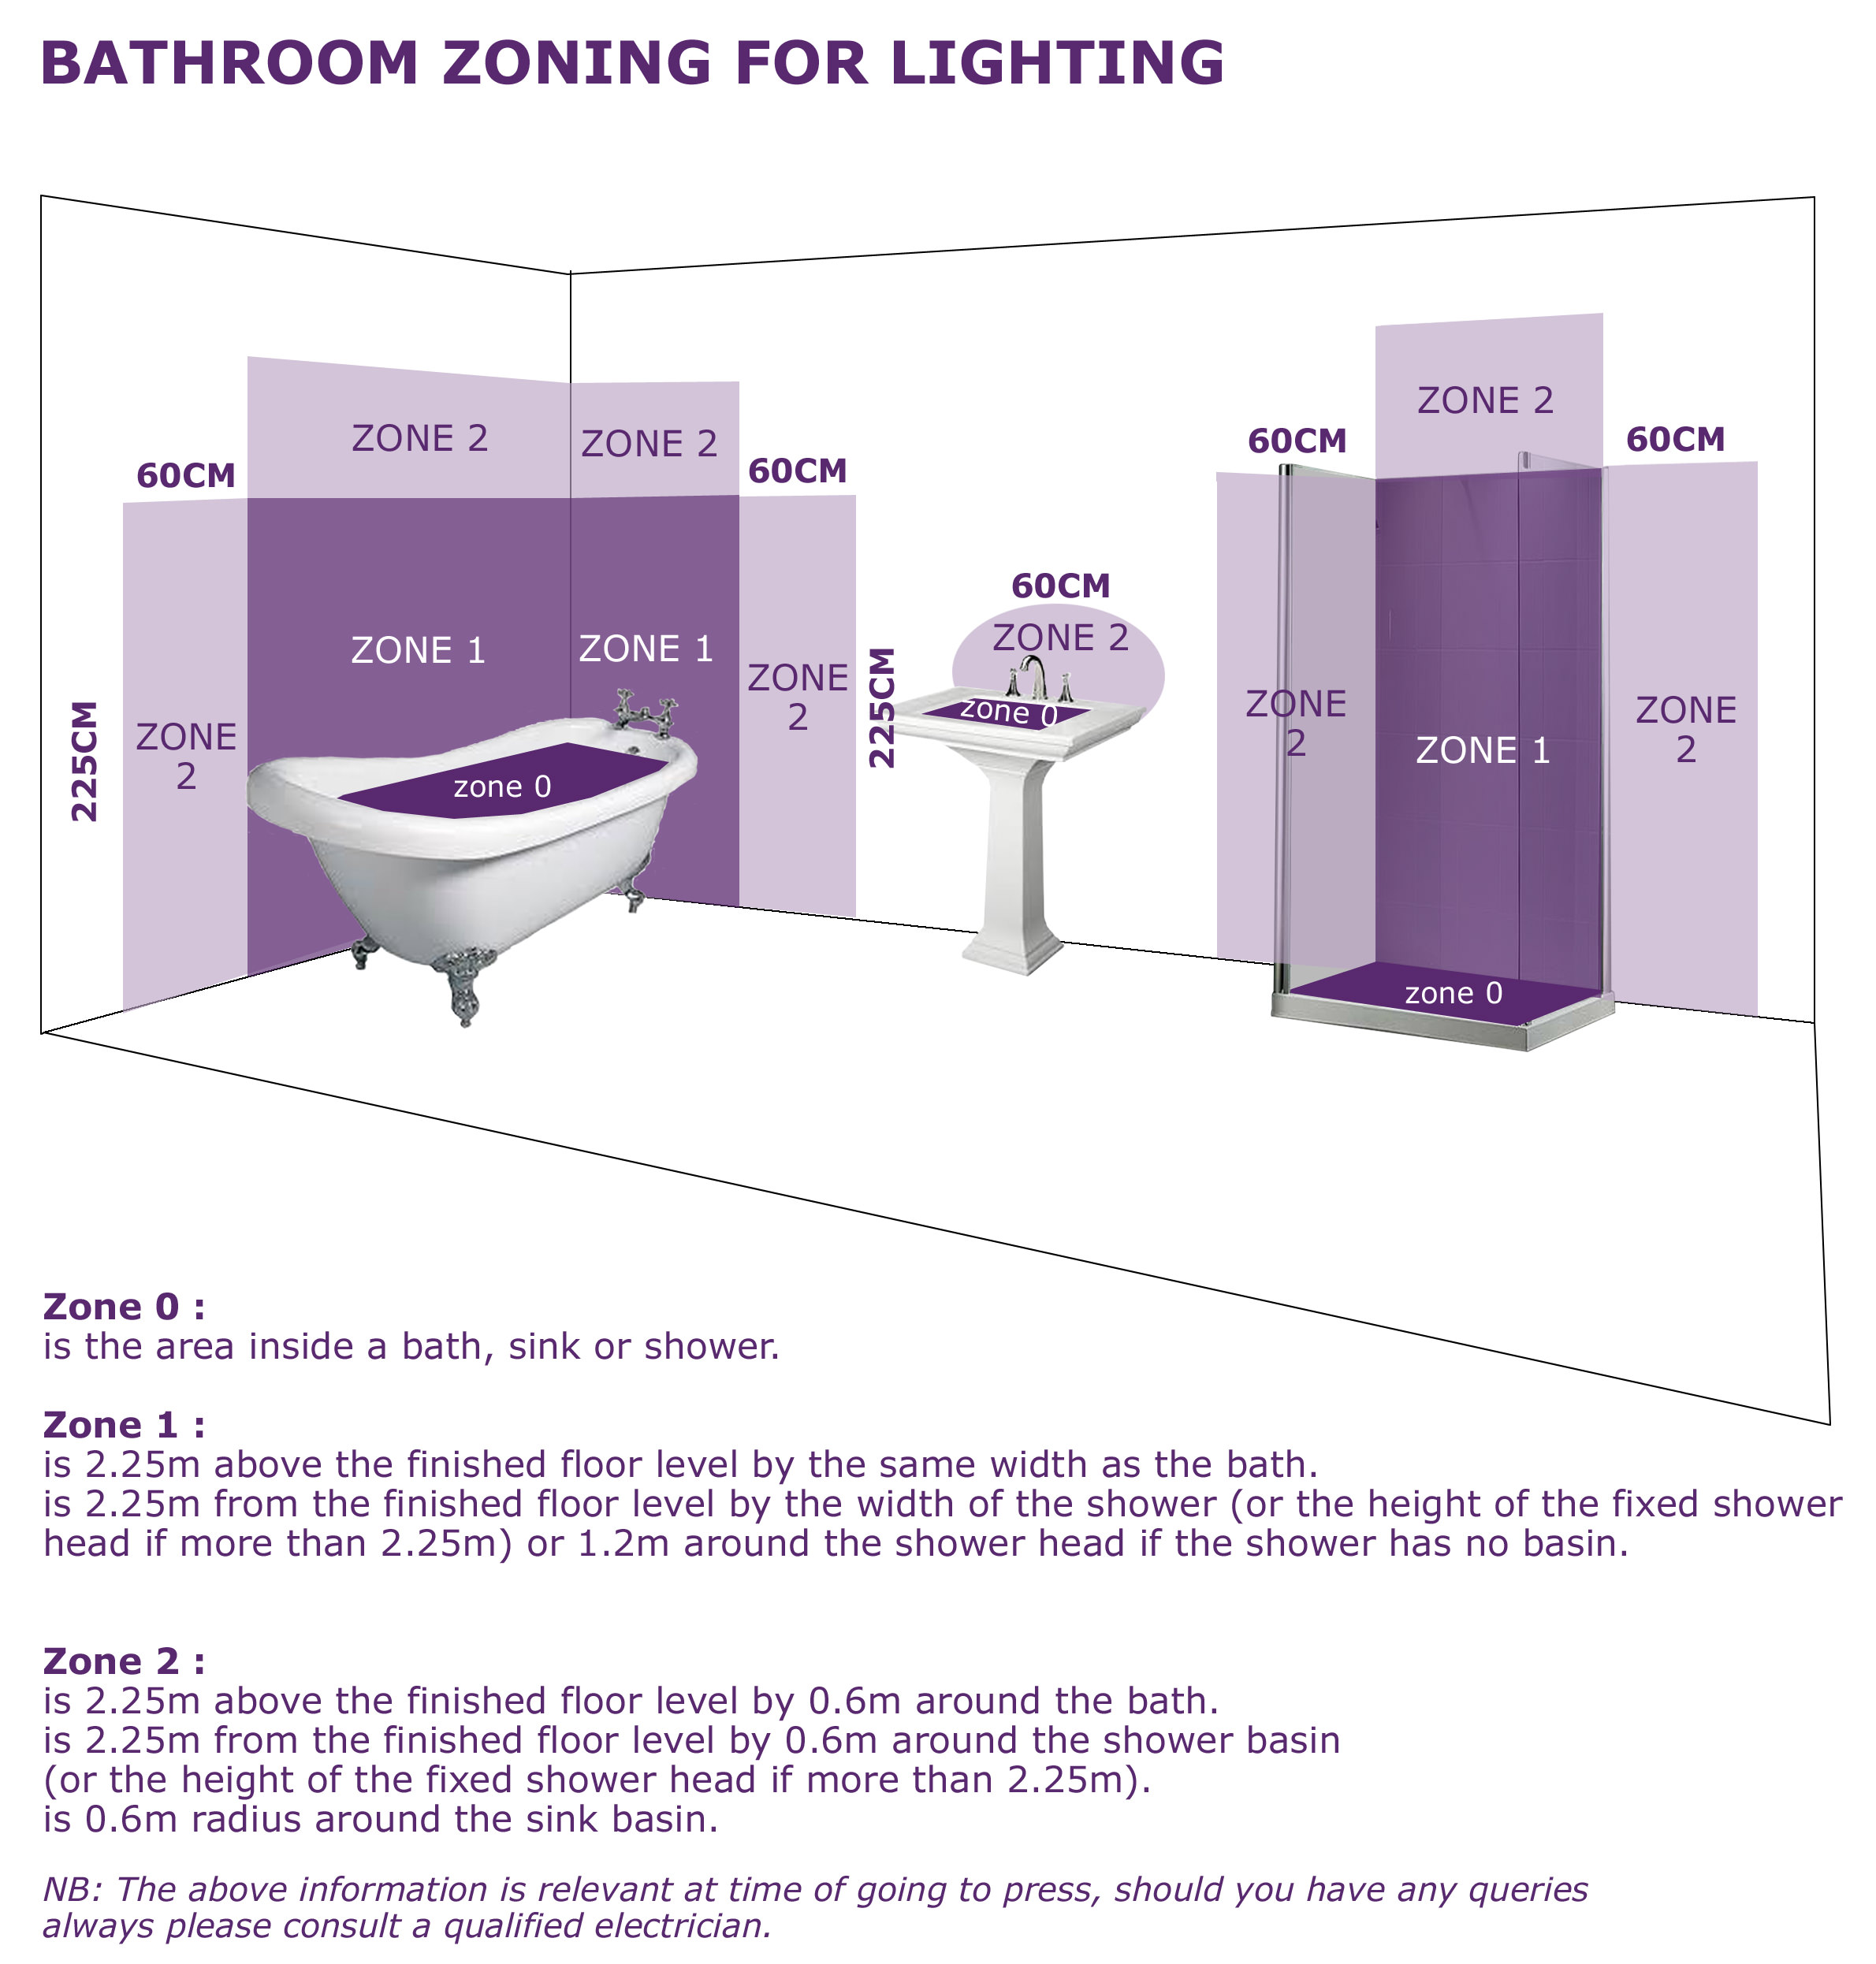 Bathroom Lighting Rules And Regs Lamps And Lights Offers Some Help